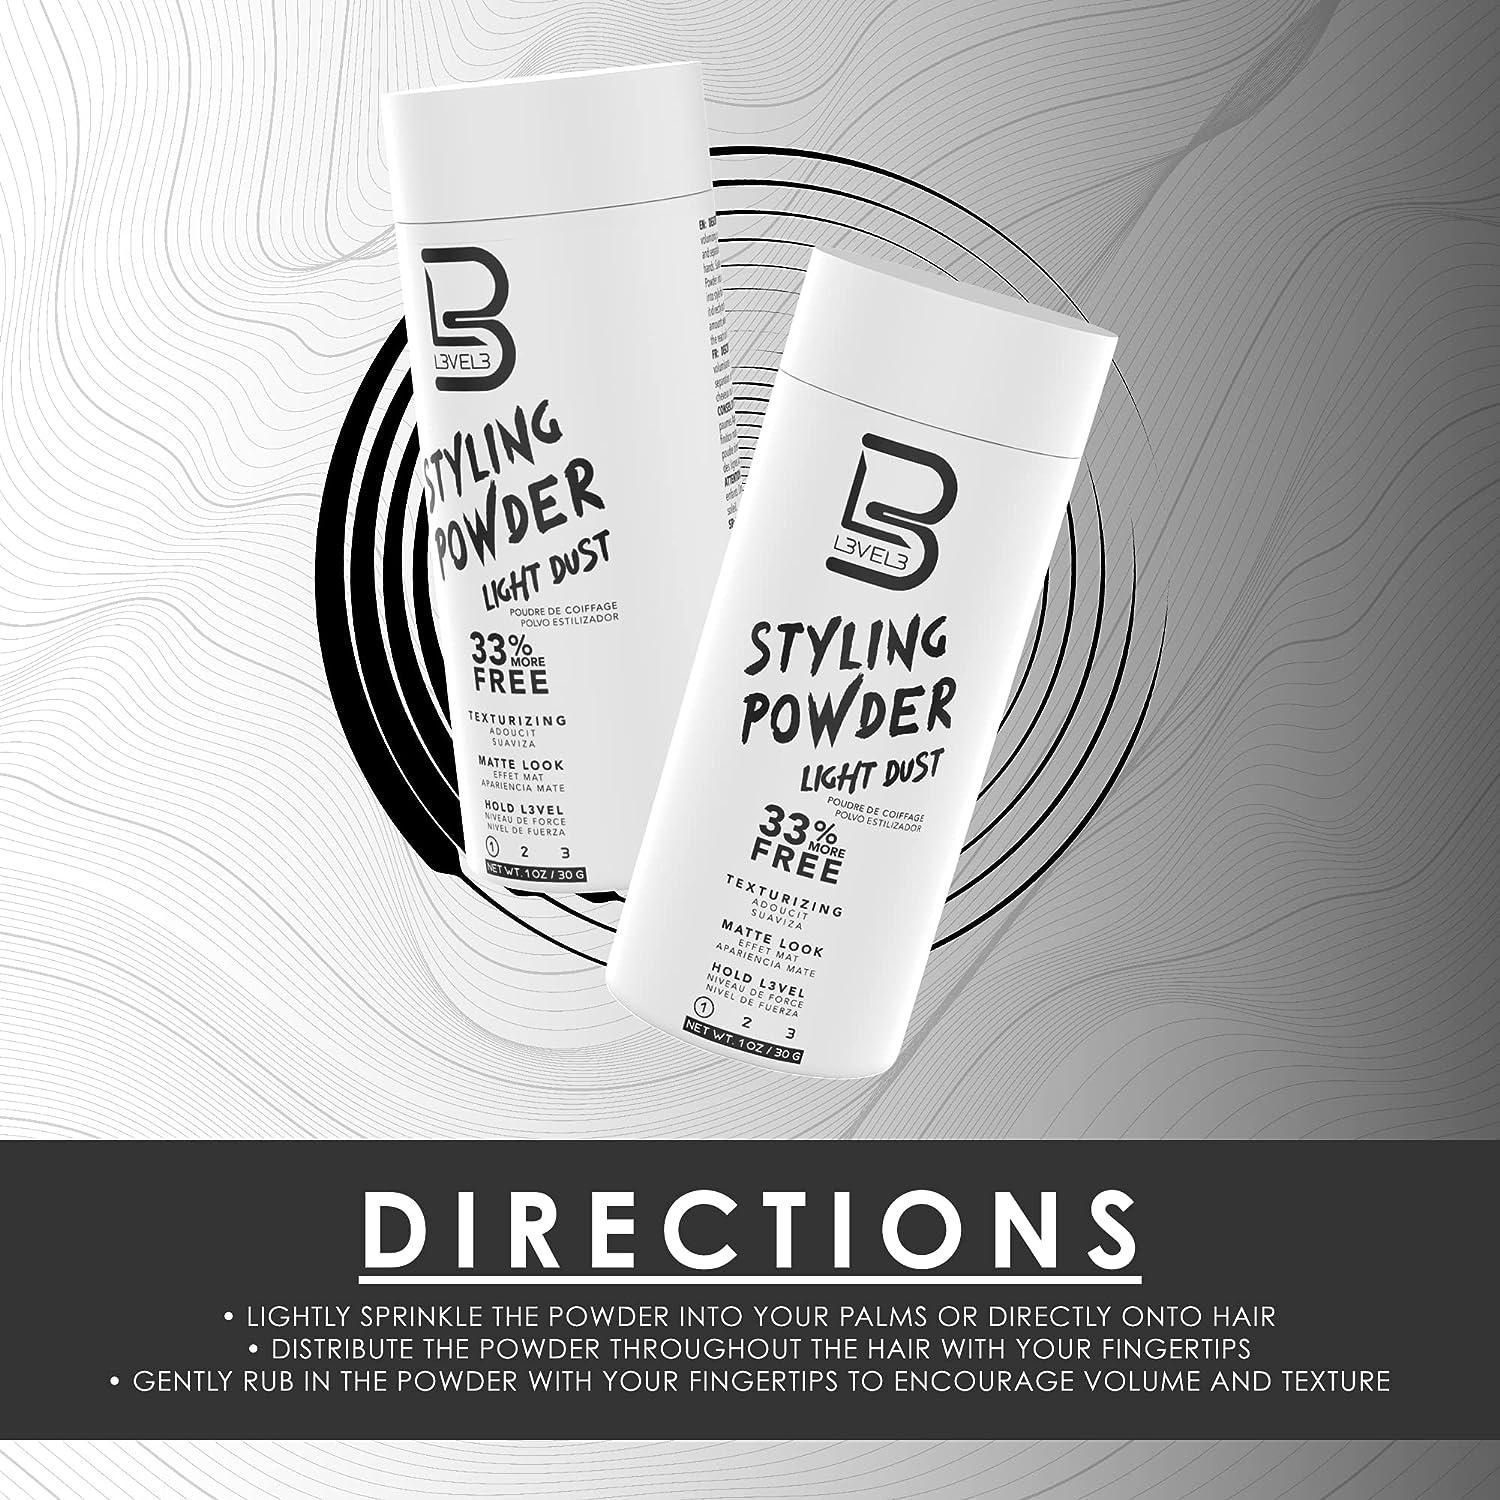 L3 Level 3 Light Hold Styling Powder - Natural Matte Hairstyle